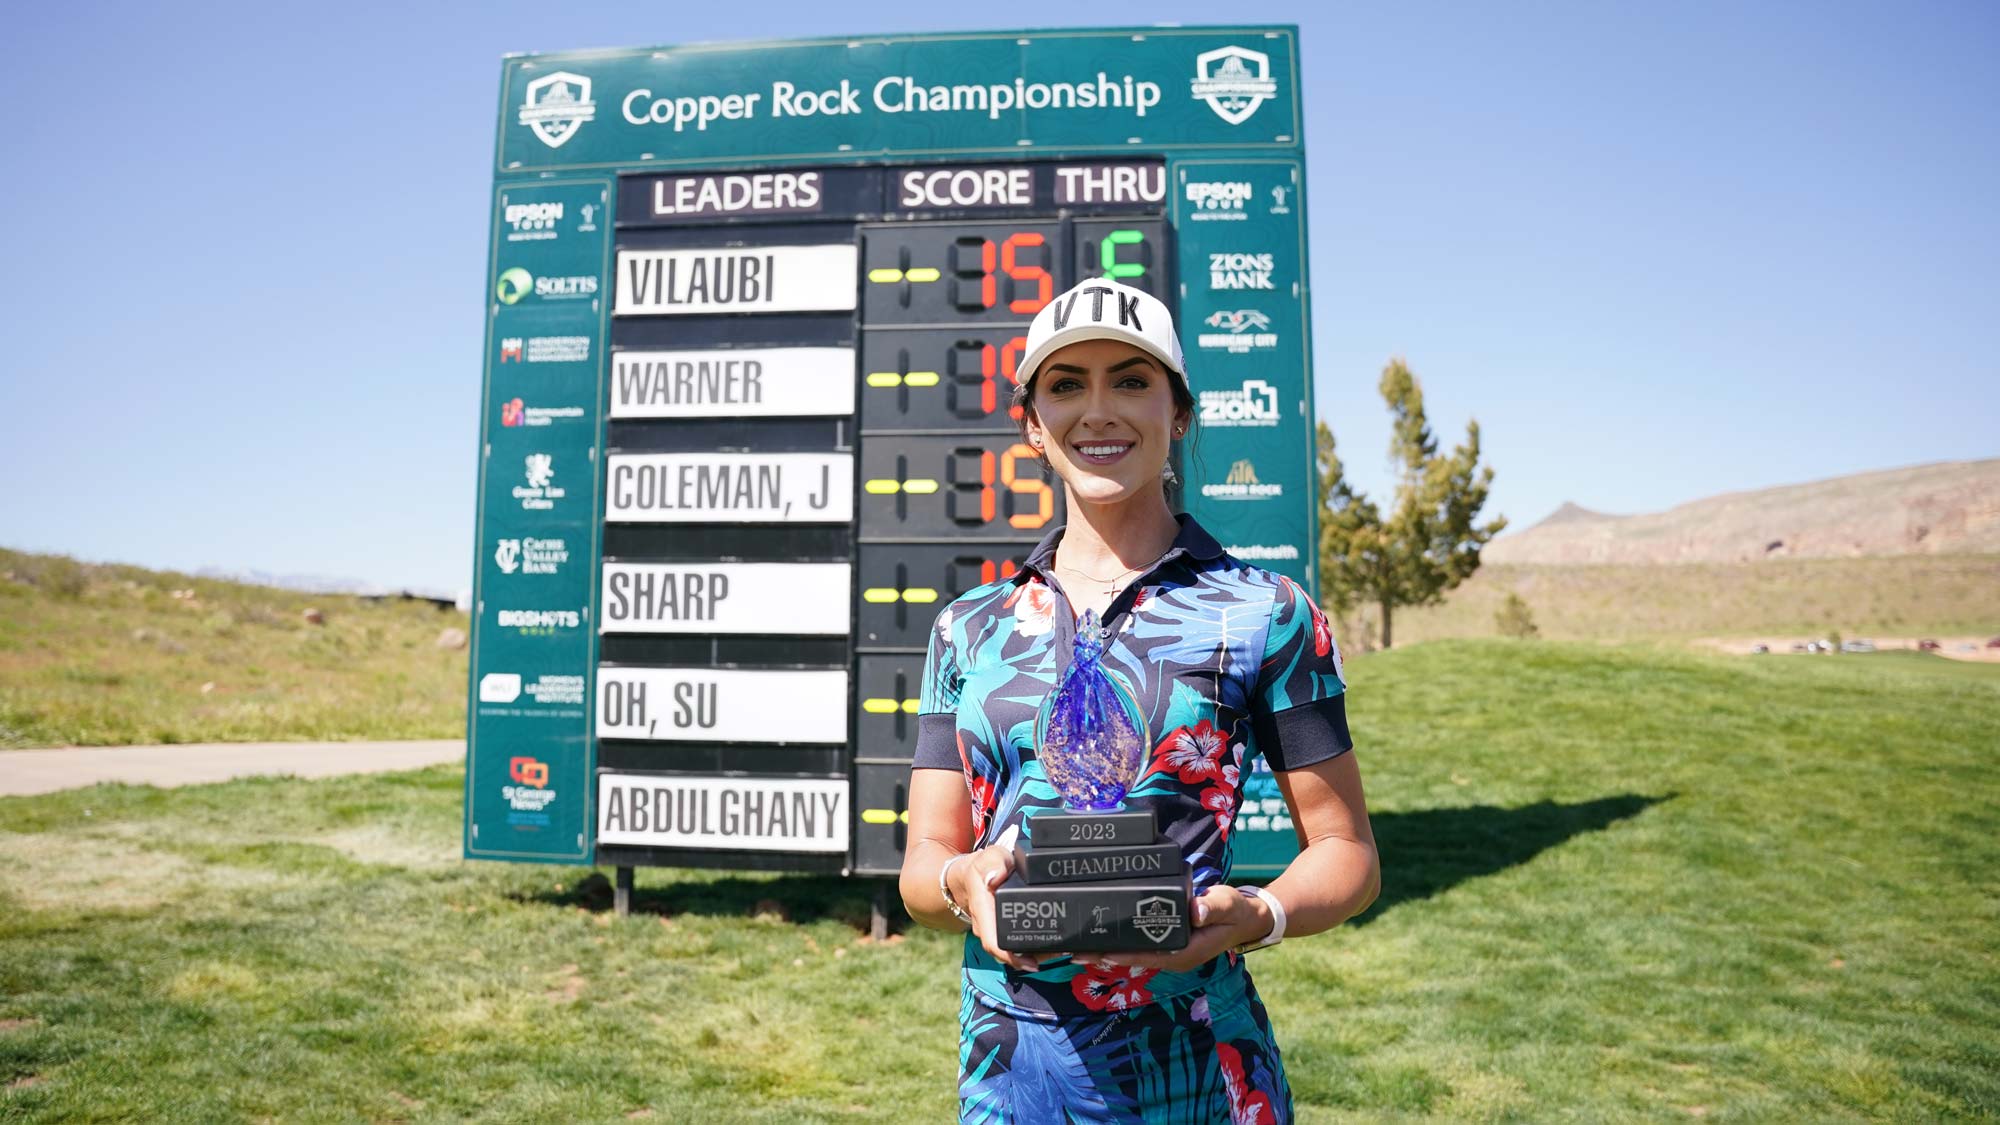 Savannah Vilaubi poses with the trophy after winning the 2023 Copper Rock Championship